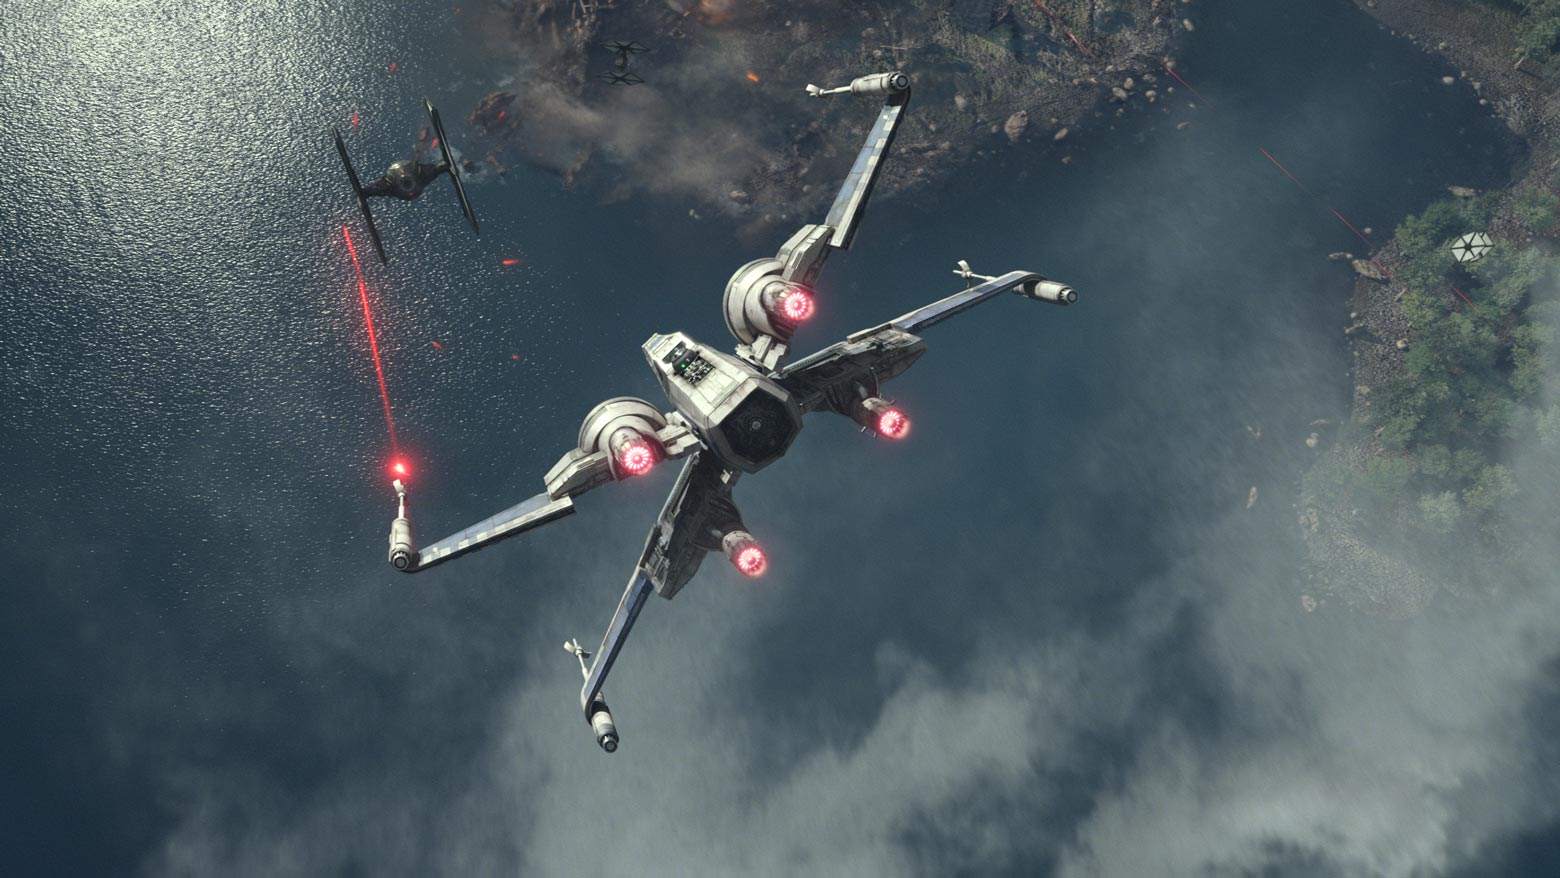 https://lumiere-a.akamaihd.net/v1/images/resistance-x-wing_9433981f.jpeg